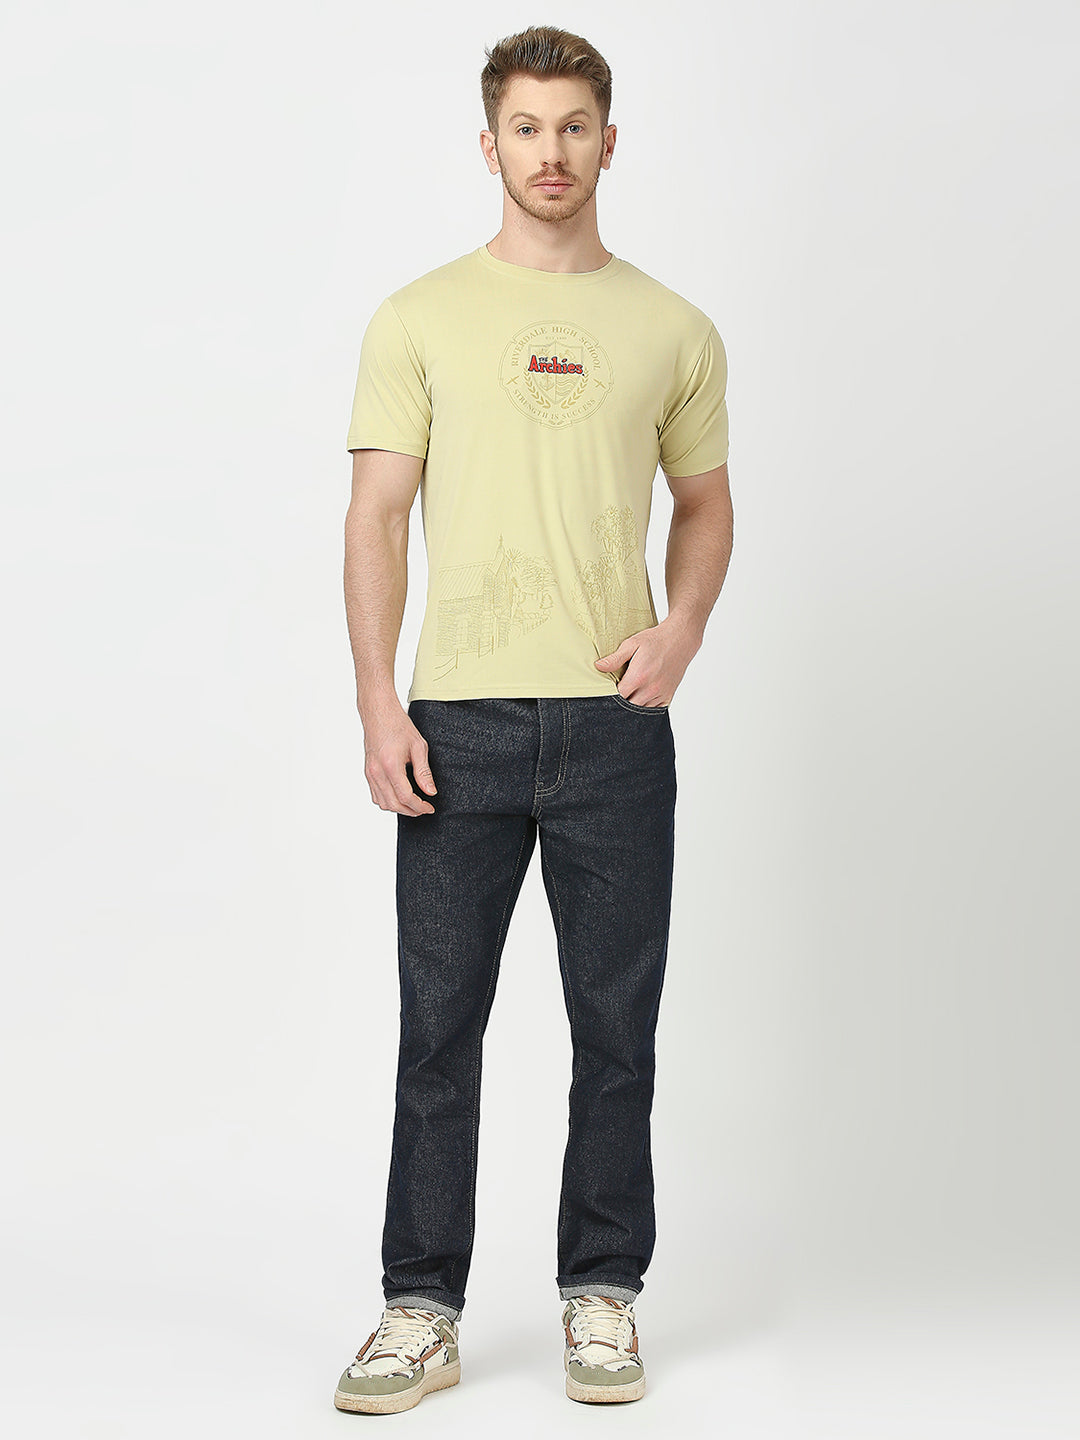 Archies Yellow T-shirt for Men